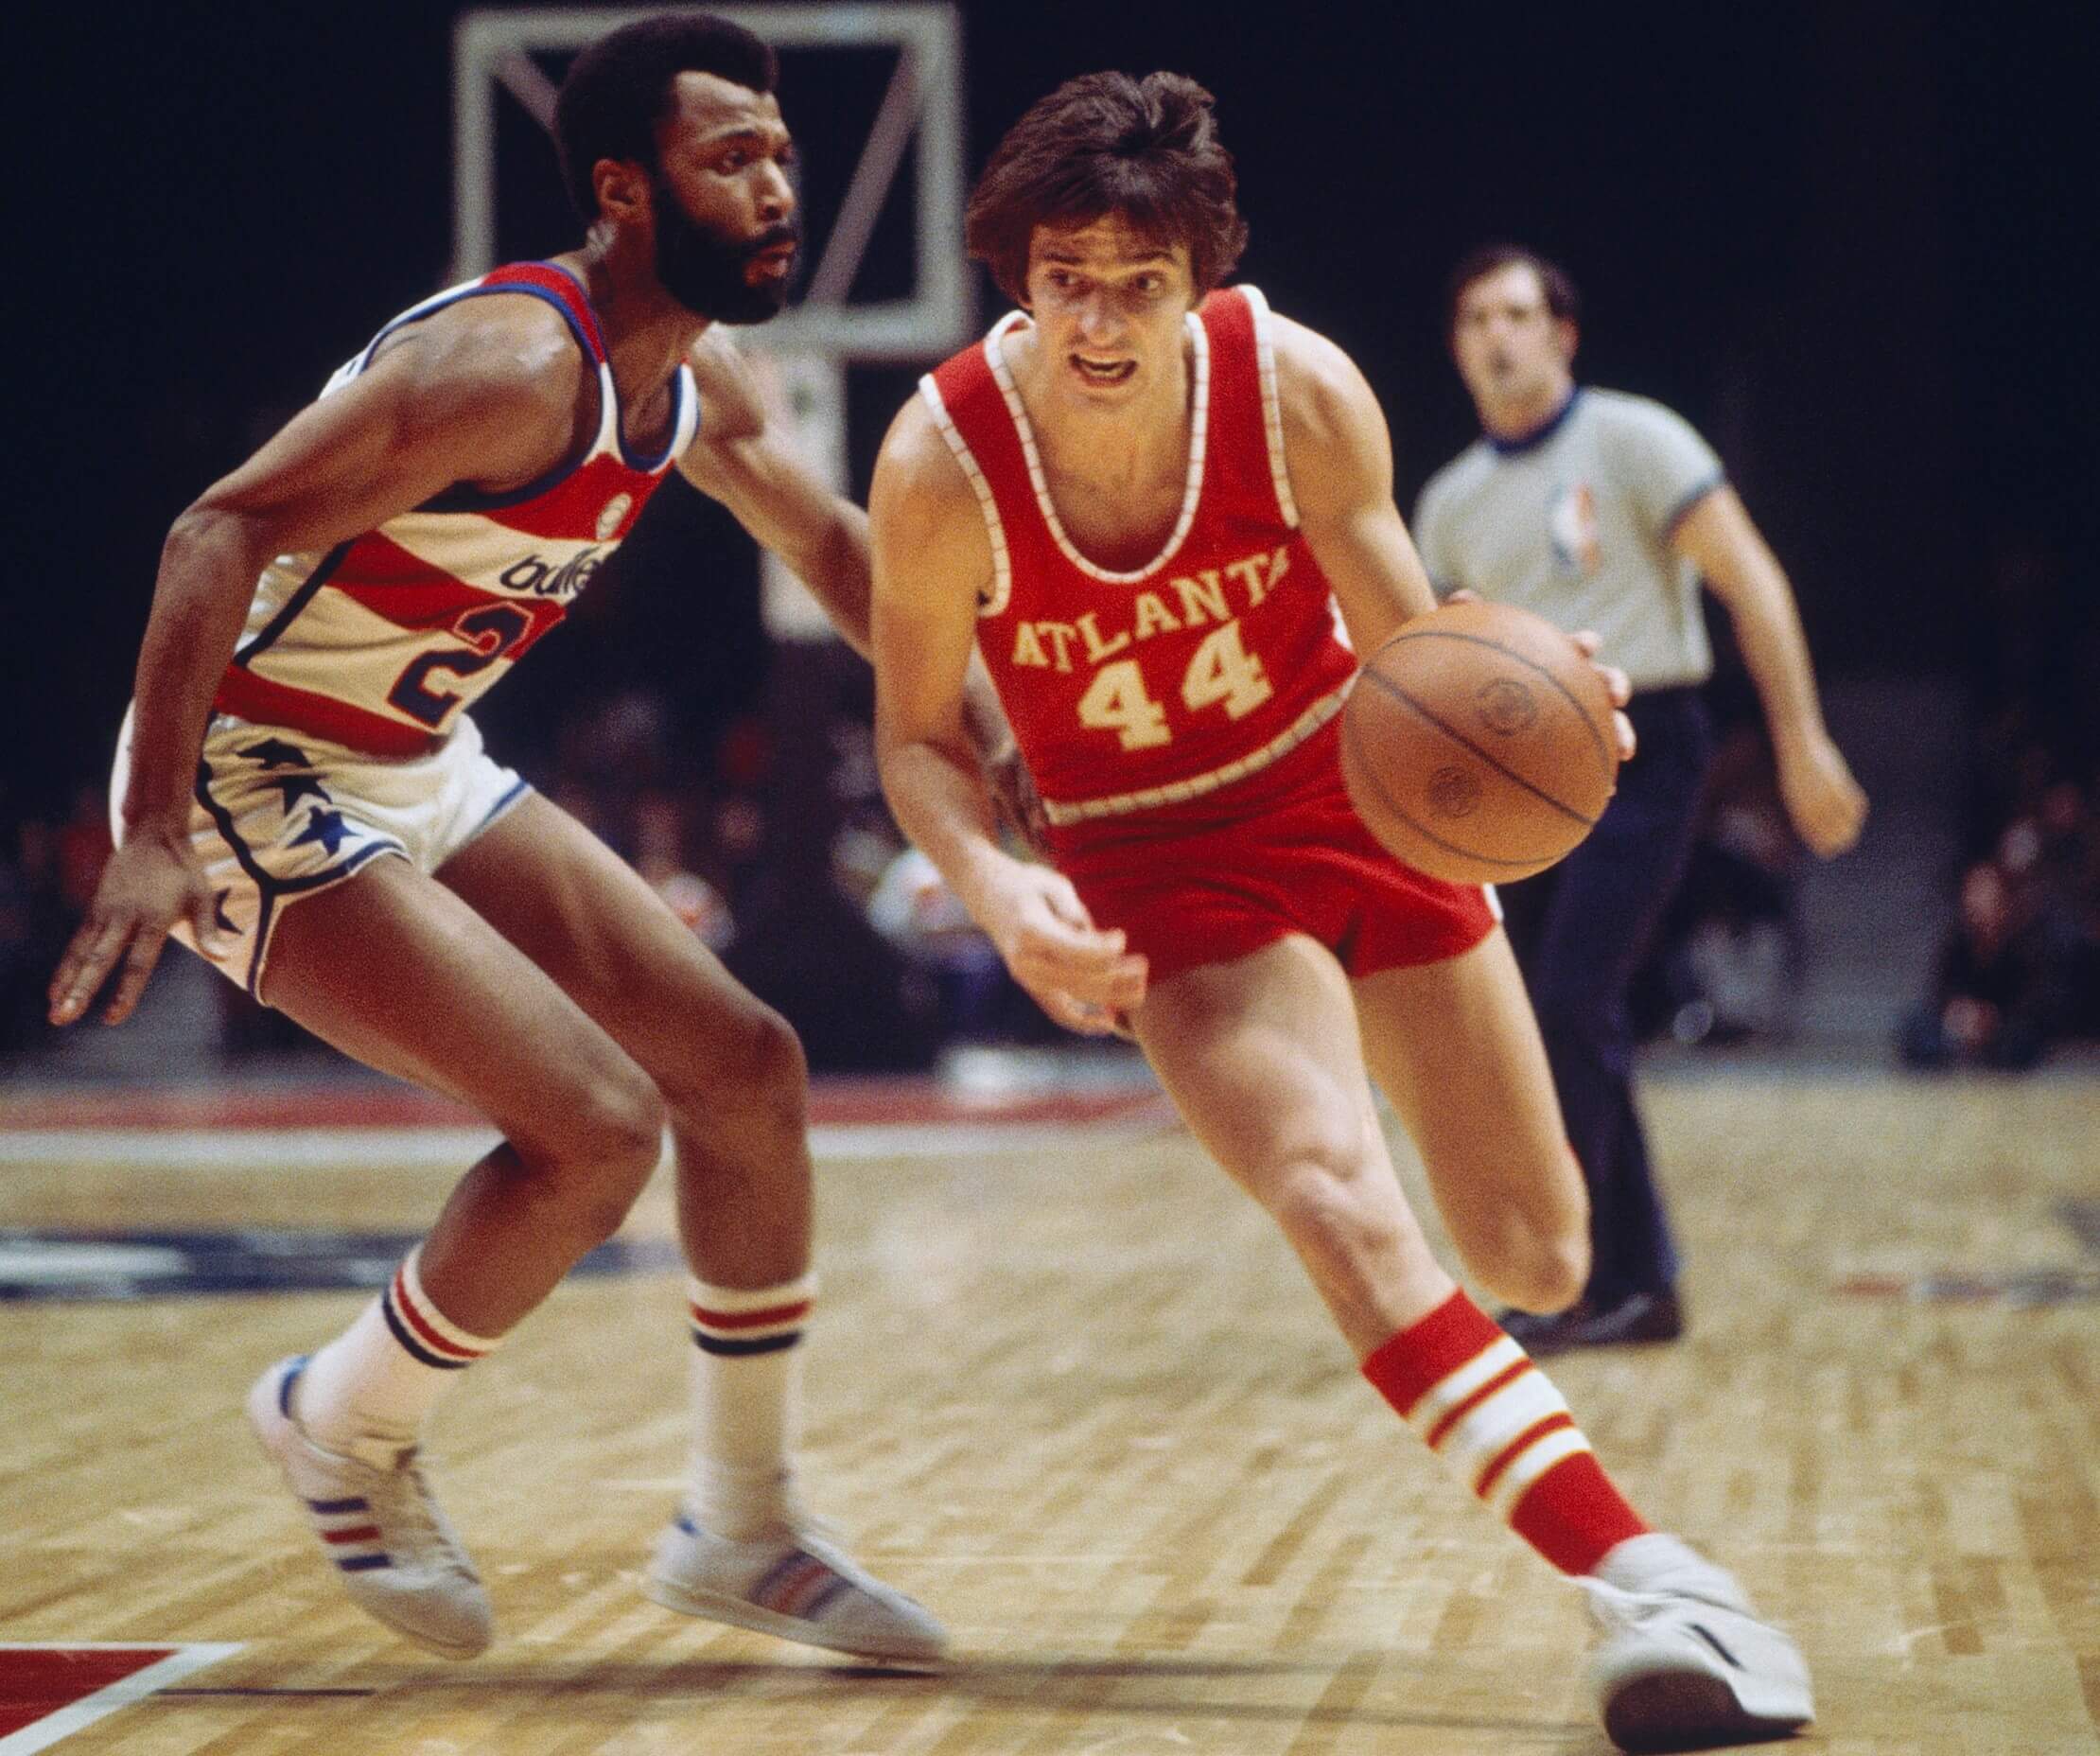 Who Were the 2 Players Selected Ahead of Pete Maravich in the Loaded 1970 NBA Draft?